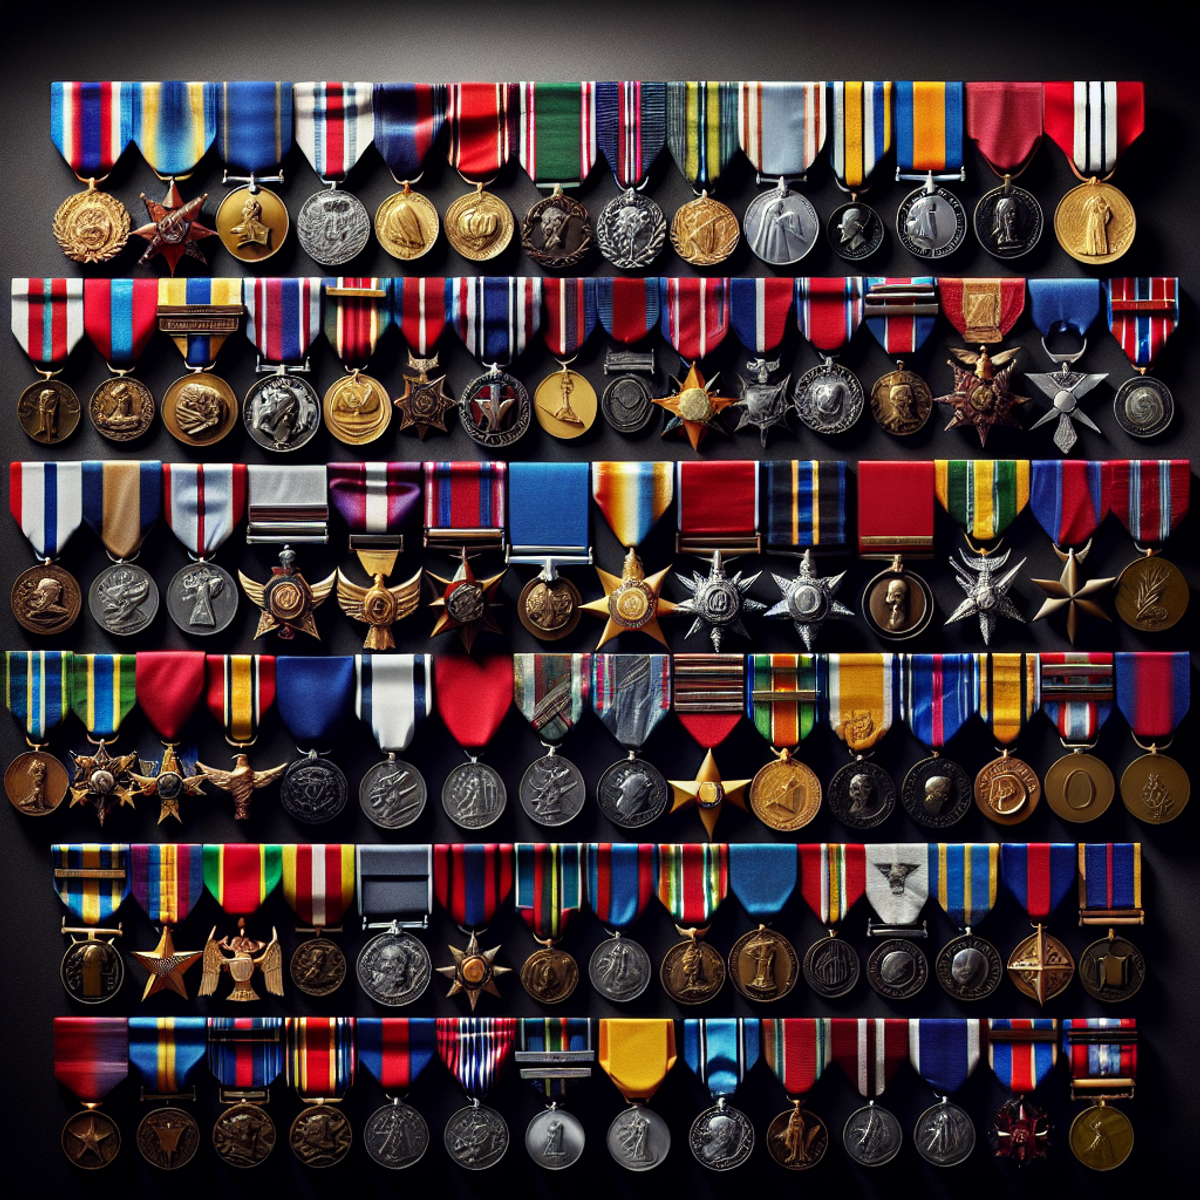 A collection of military service medals arranged in a striking display.